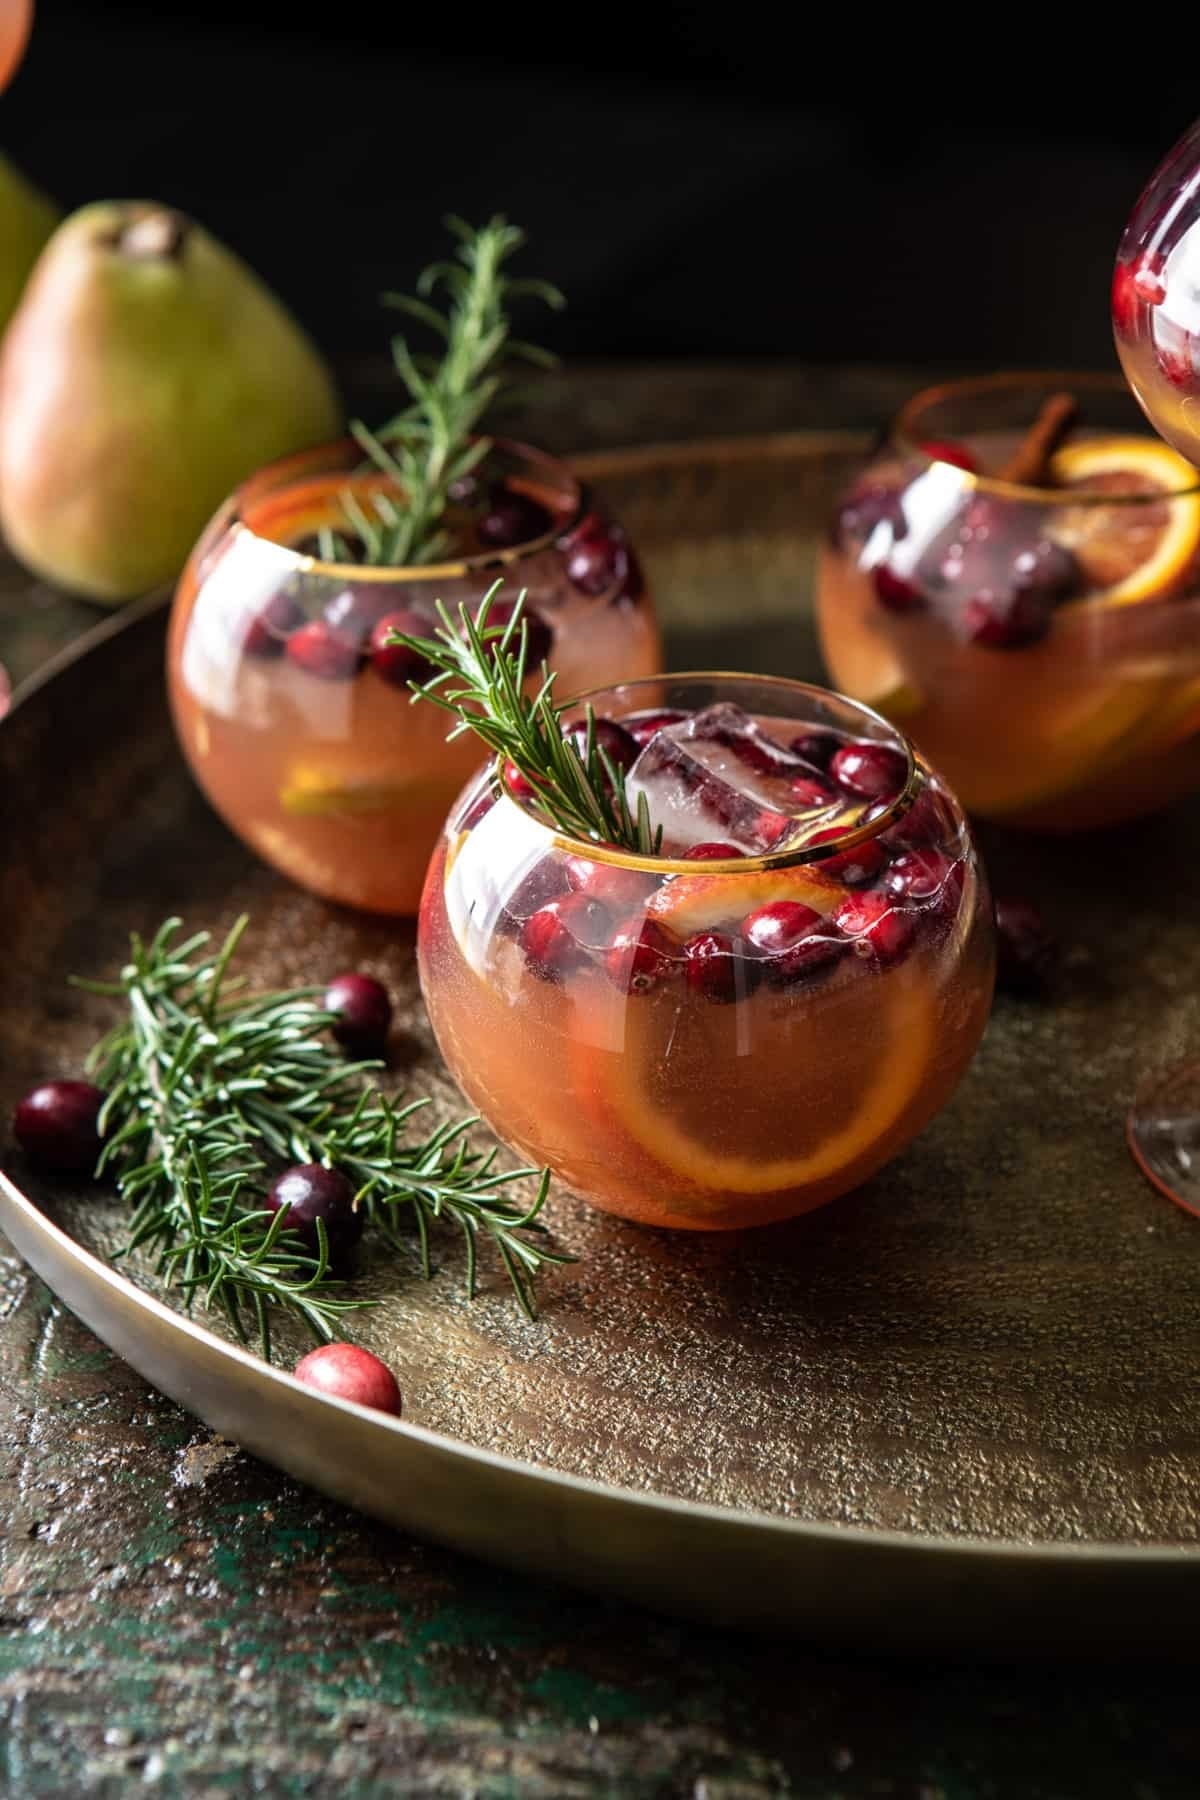 Glasses of pear and cranberry beverage